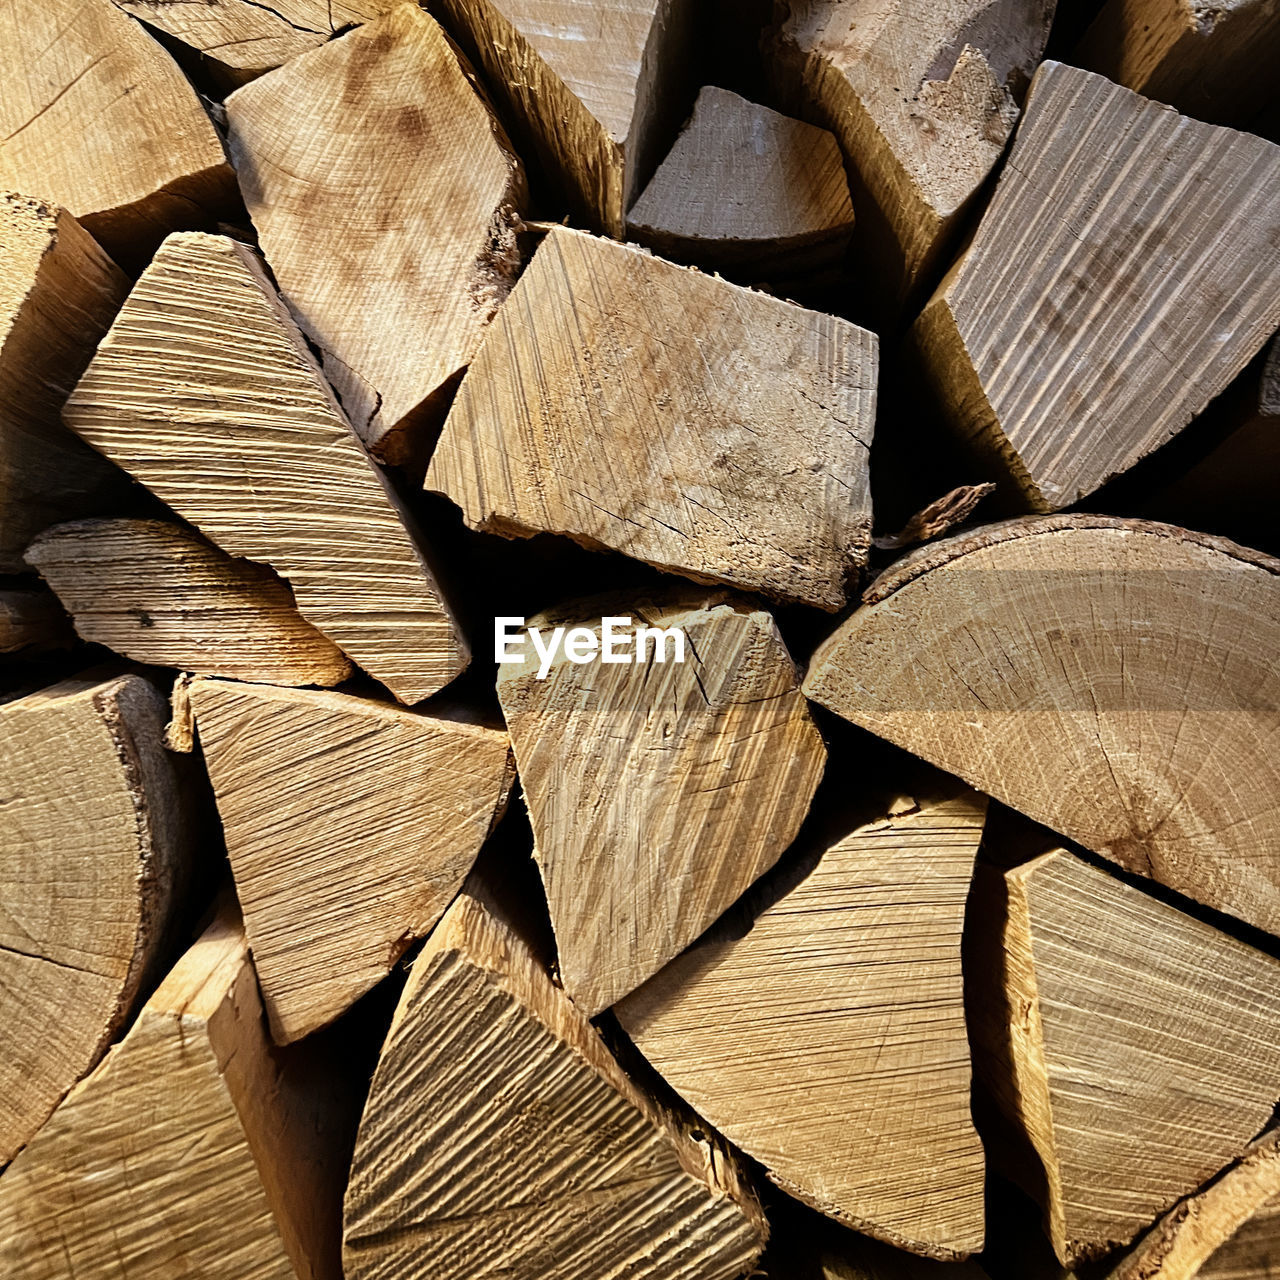 full frame, wood, backgrounds, large group of objects, leaf, timber, close-up, abundance, lumber industry, log, firewood, pattern, no people, deforestation, textured, tree, forest, brown, lumber, heap, shape, woodpile, nature, power generation, still life, environmental issues, repetition